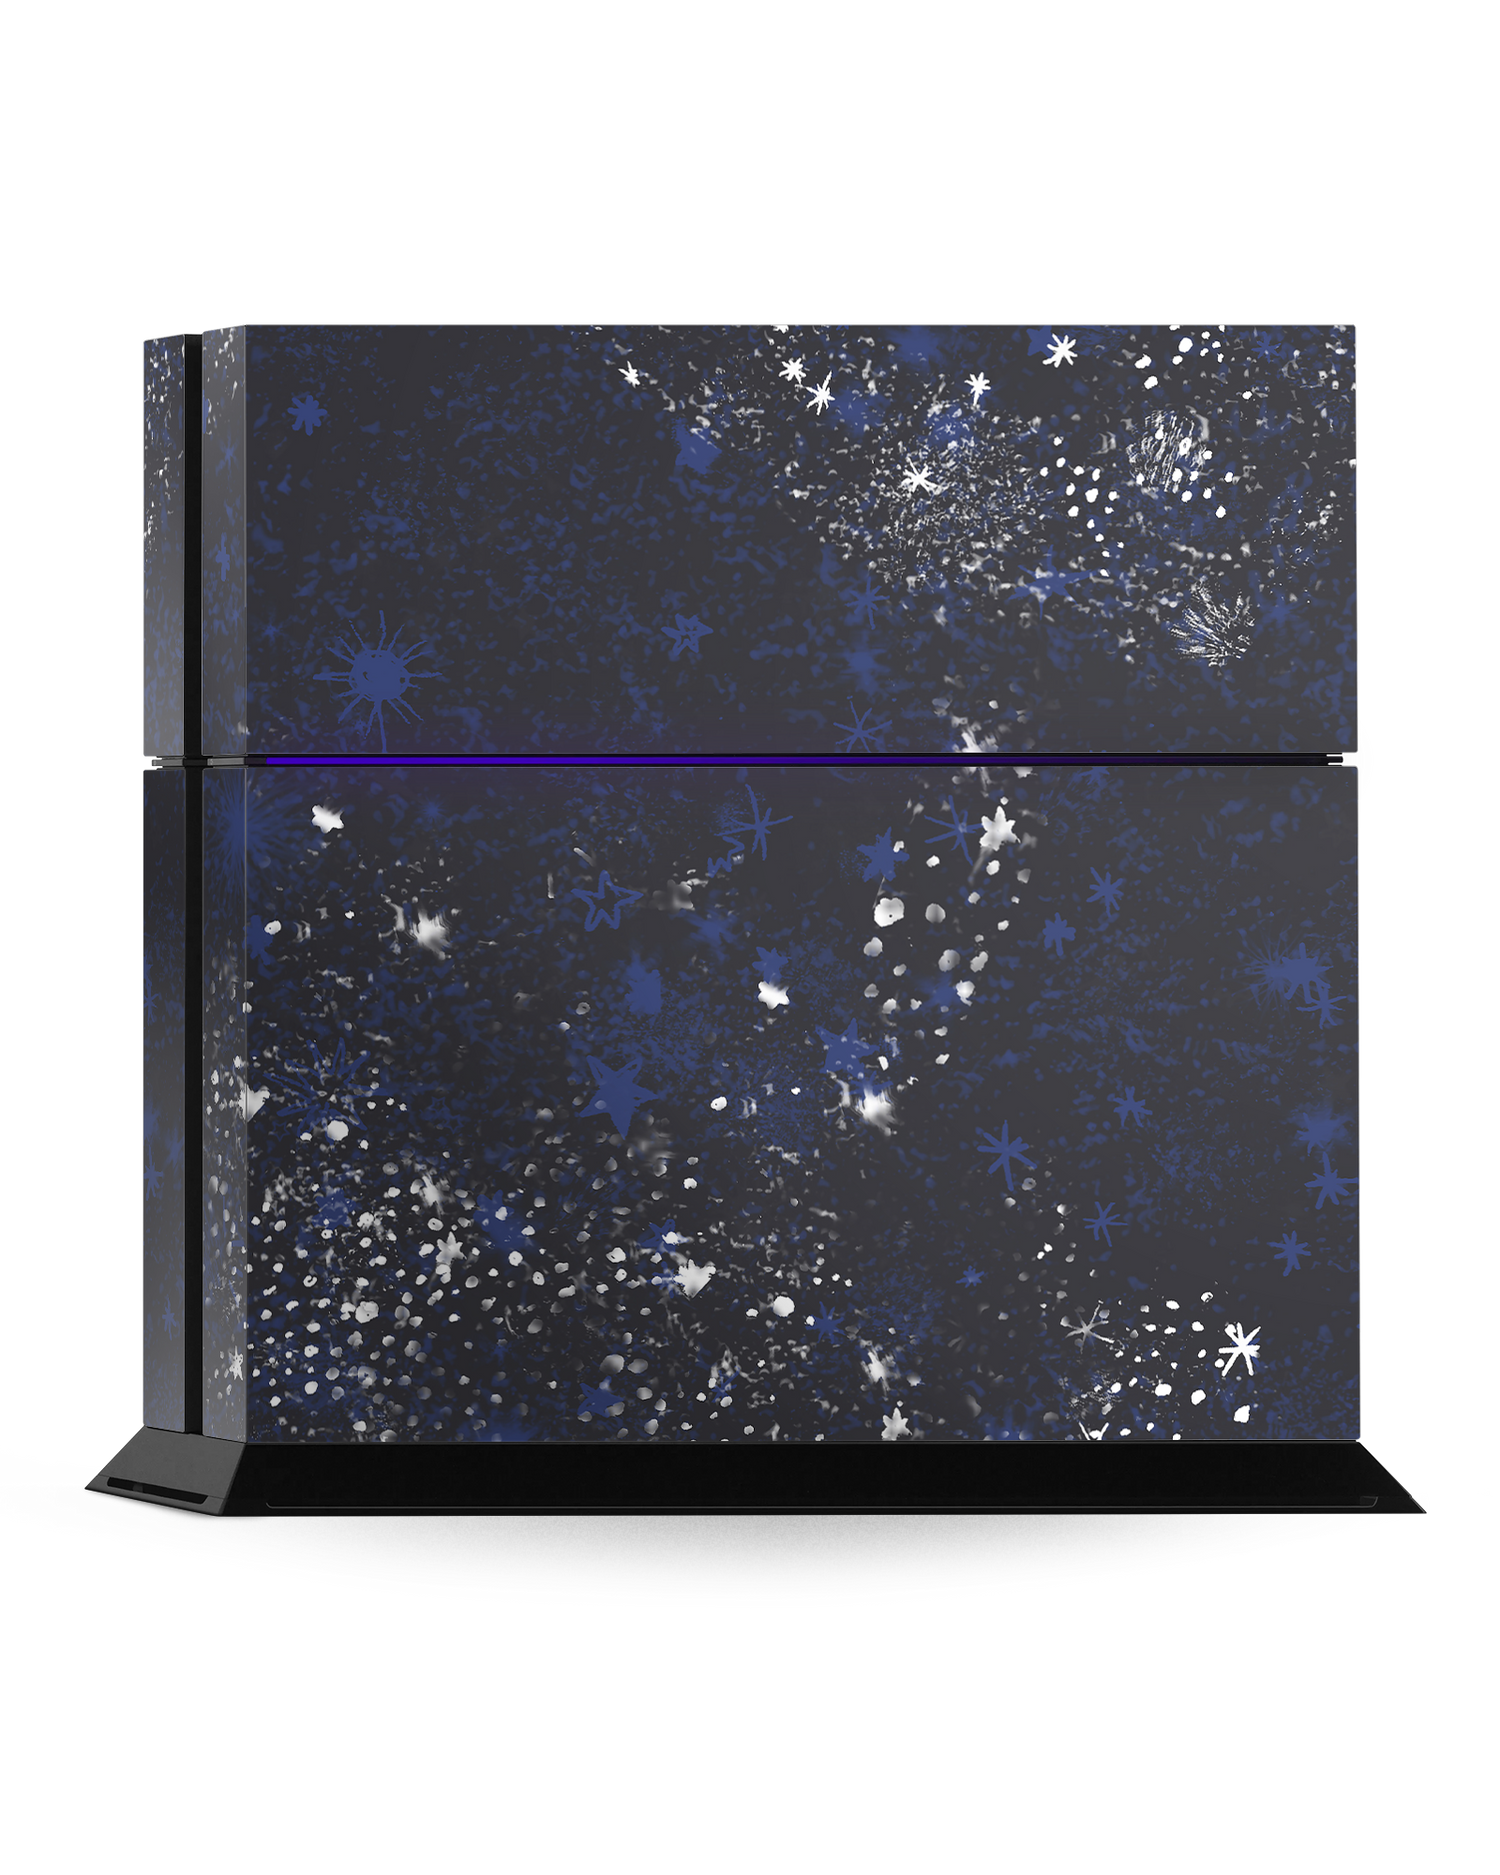 Starry Night Sky Console Skin for Sony PlayStation 4: Standing